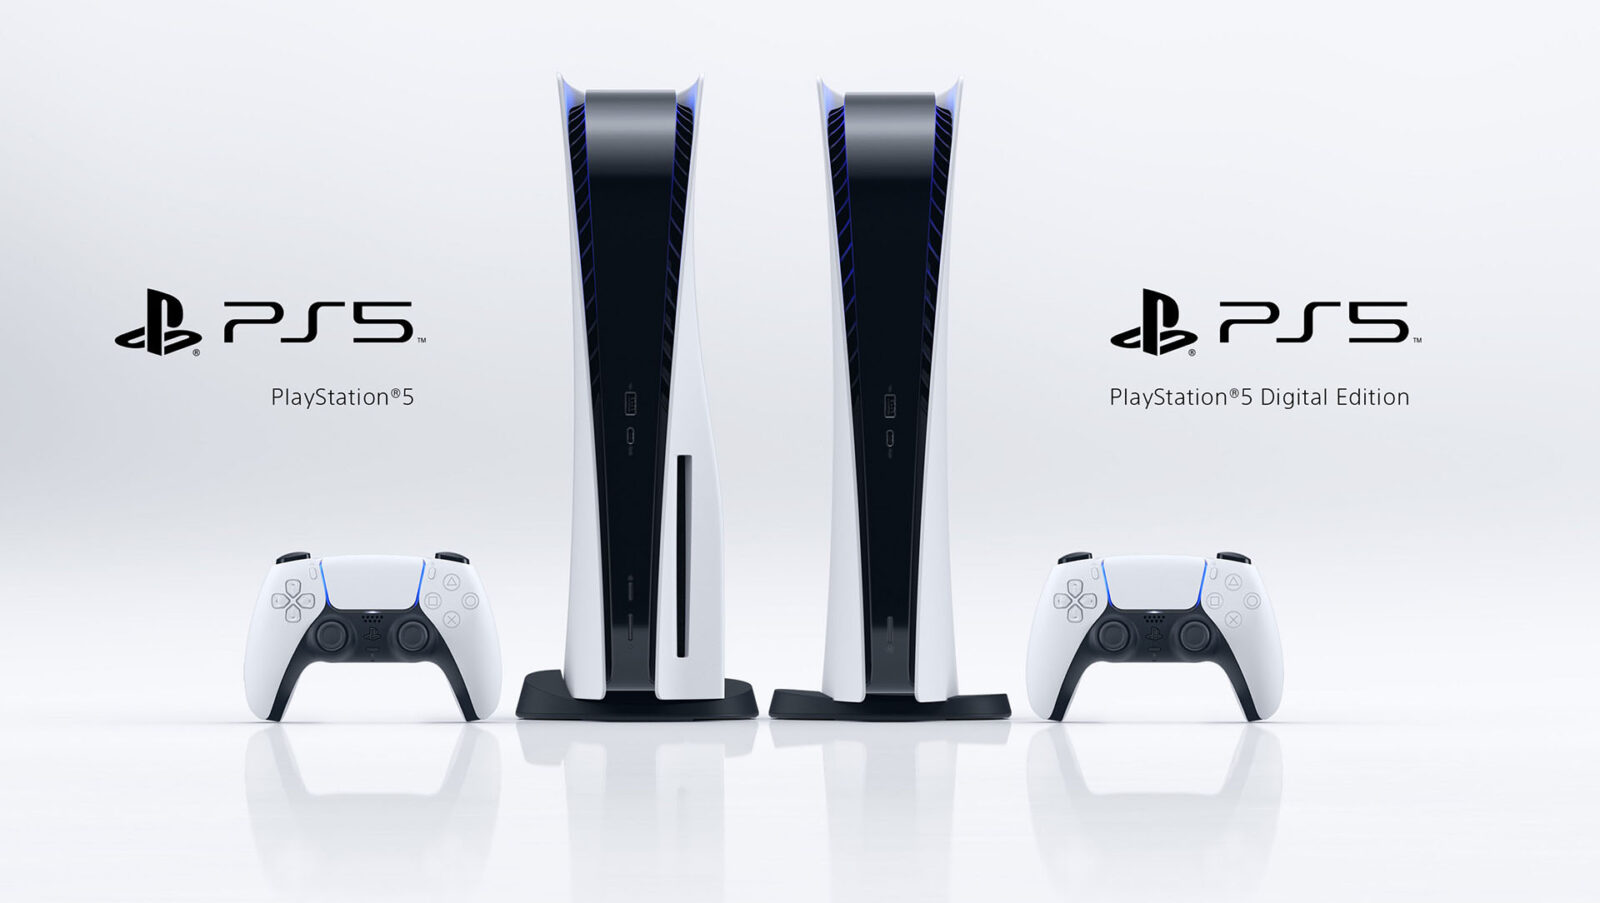 Sony Revealed the Next-Gen Console PlayStation 5’s Design